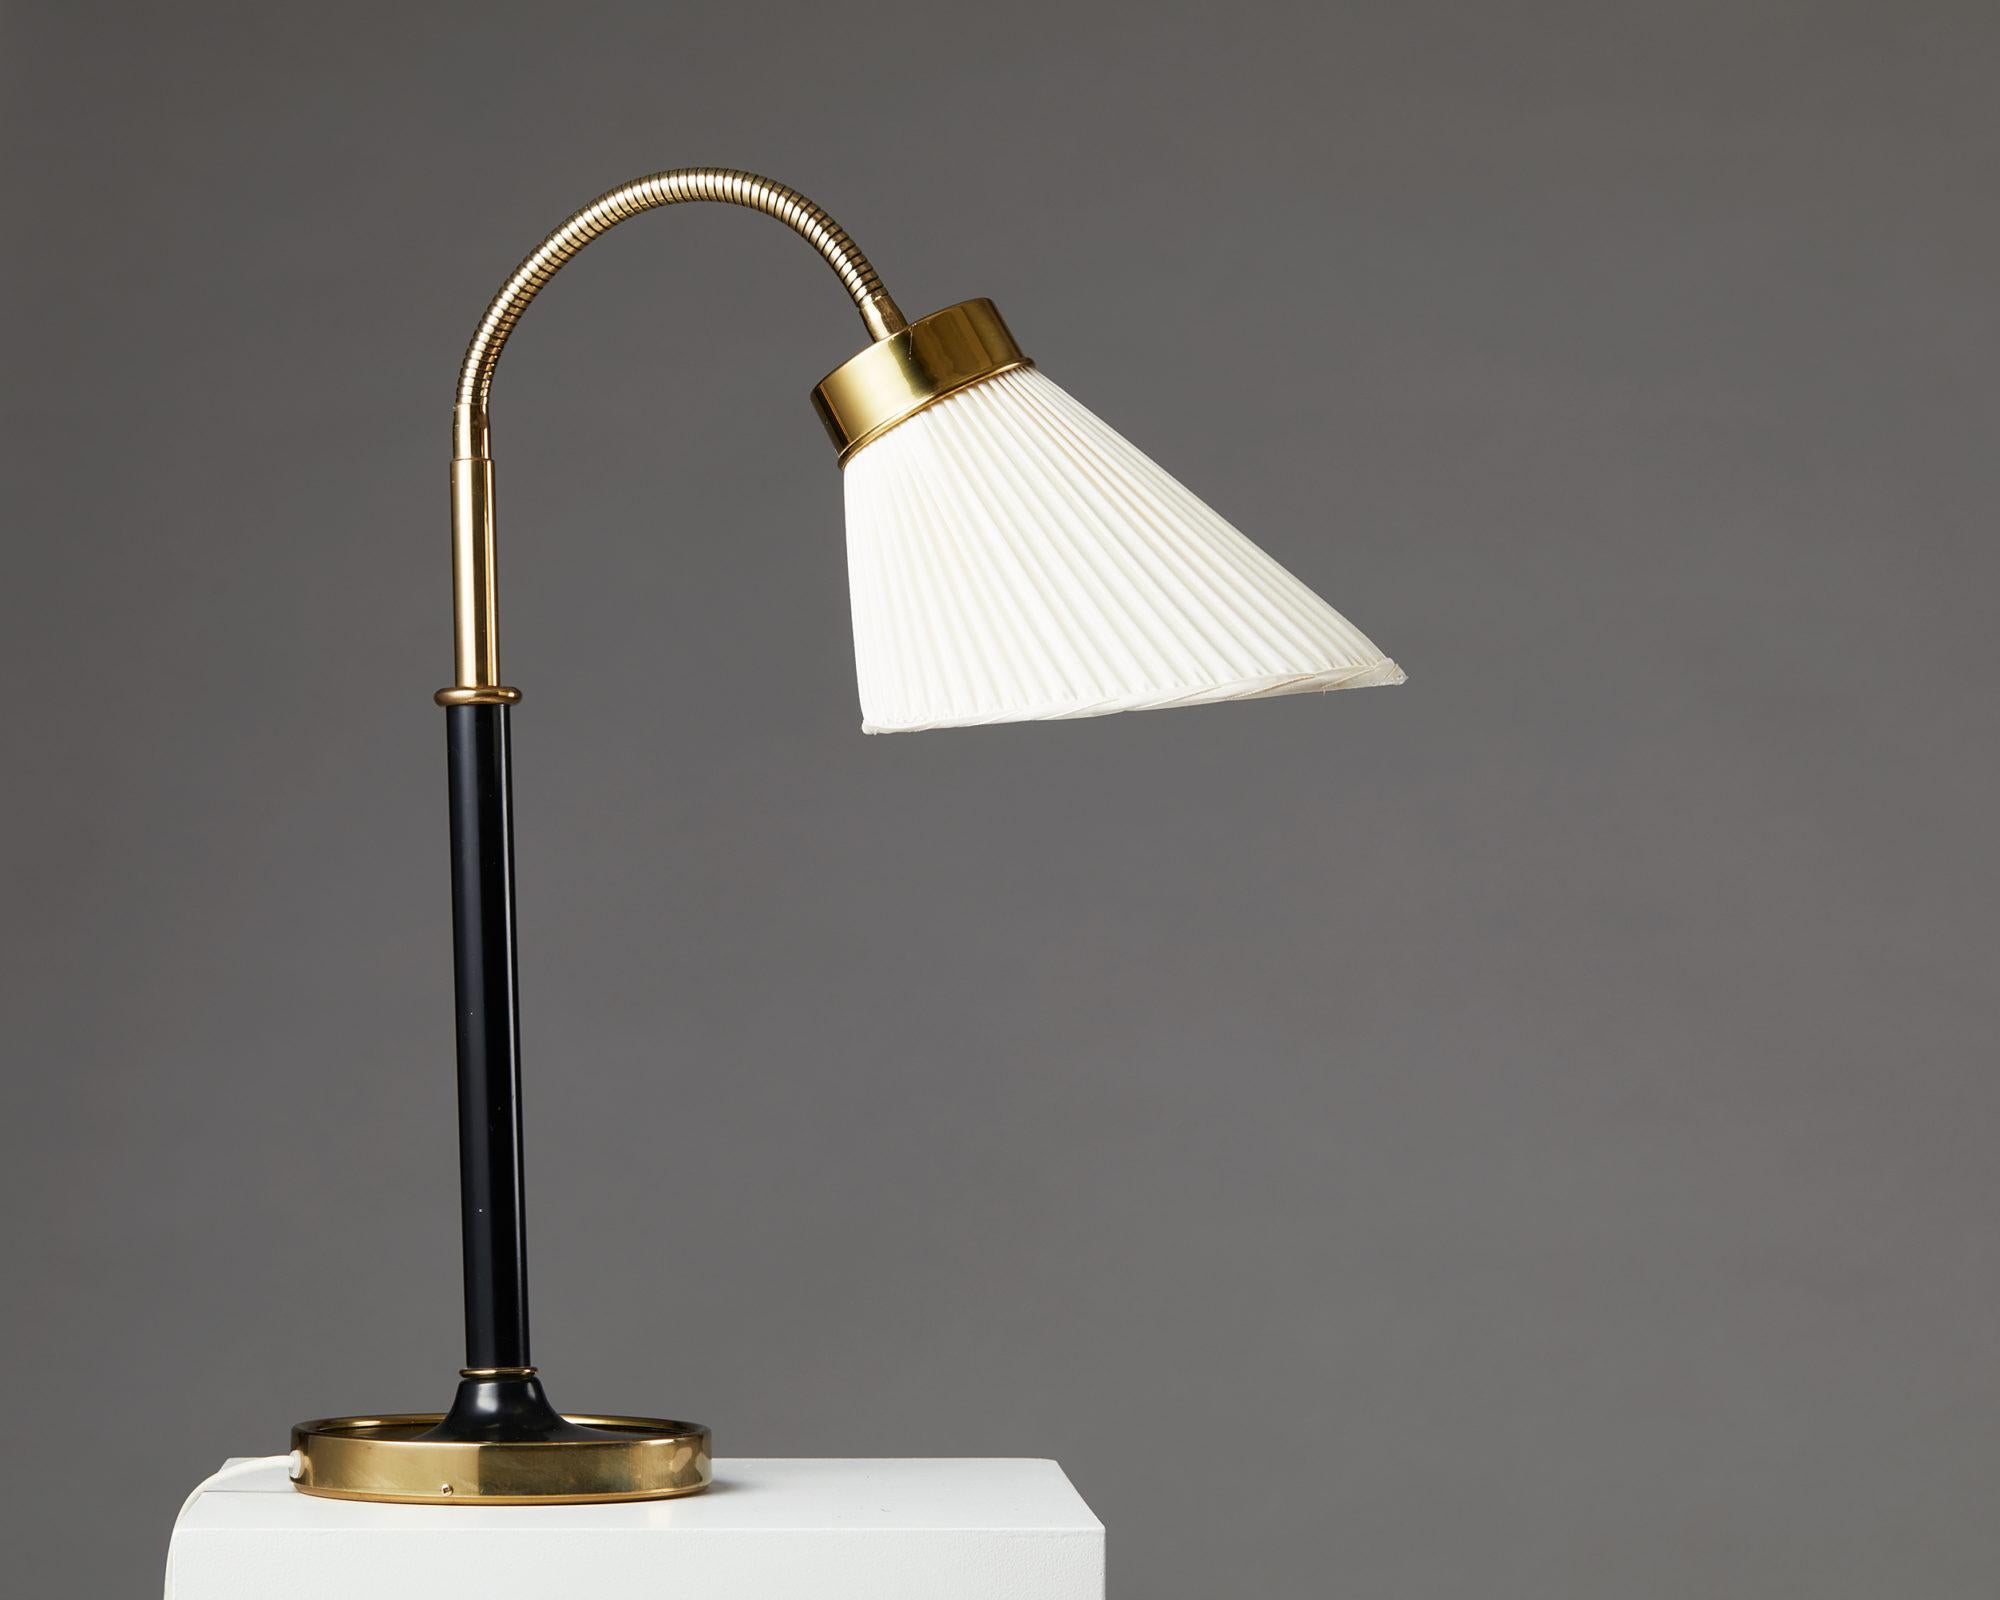 Polished and lacquered brass with fabric shade.

Measures: H: 58.5 cm / 1' 11